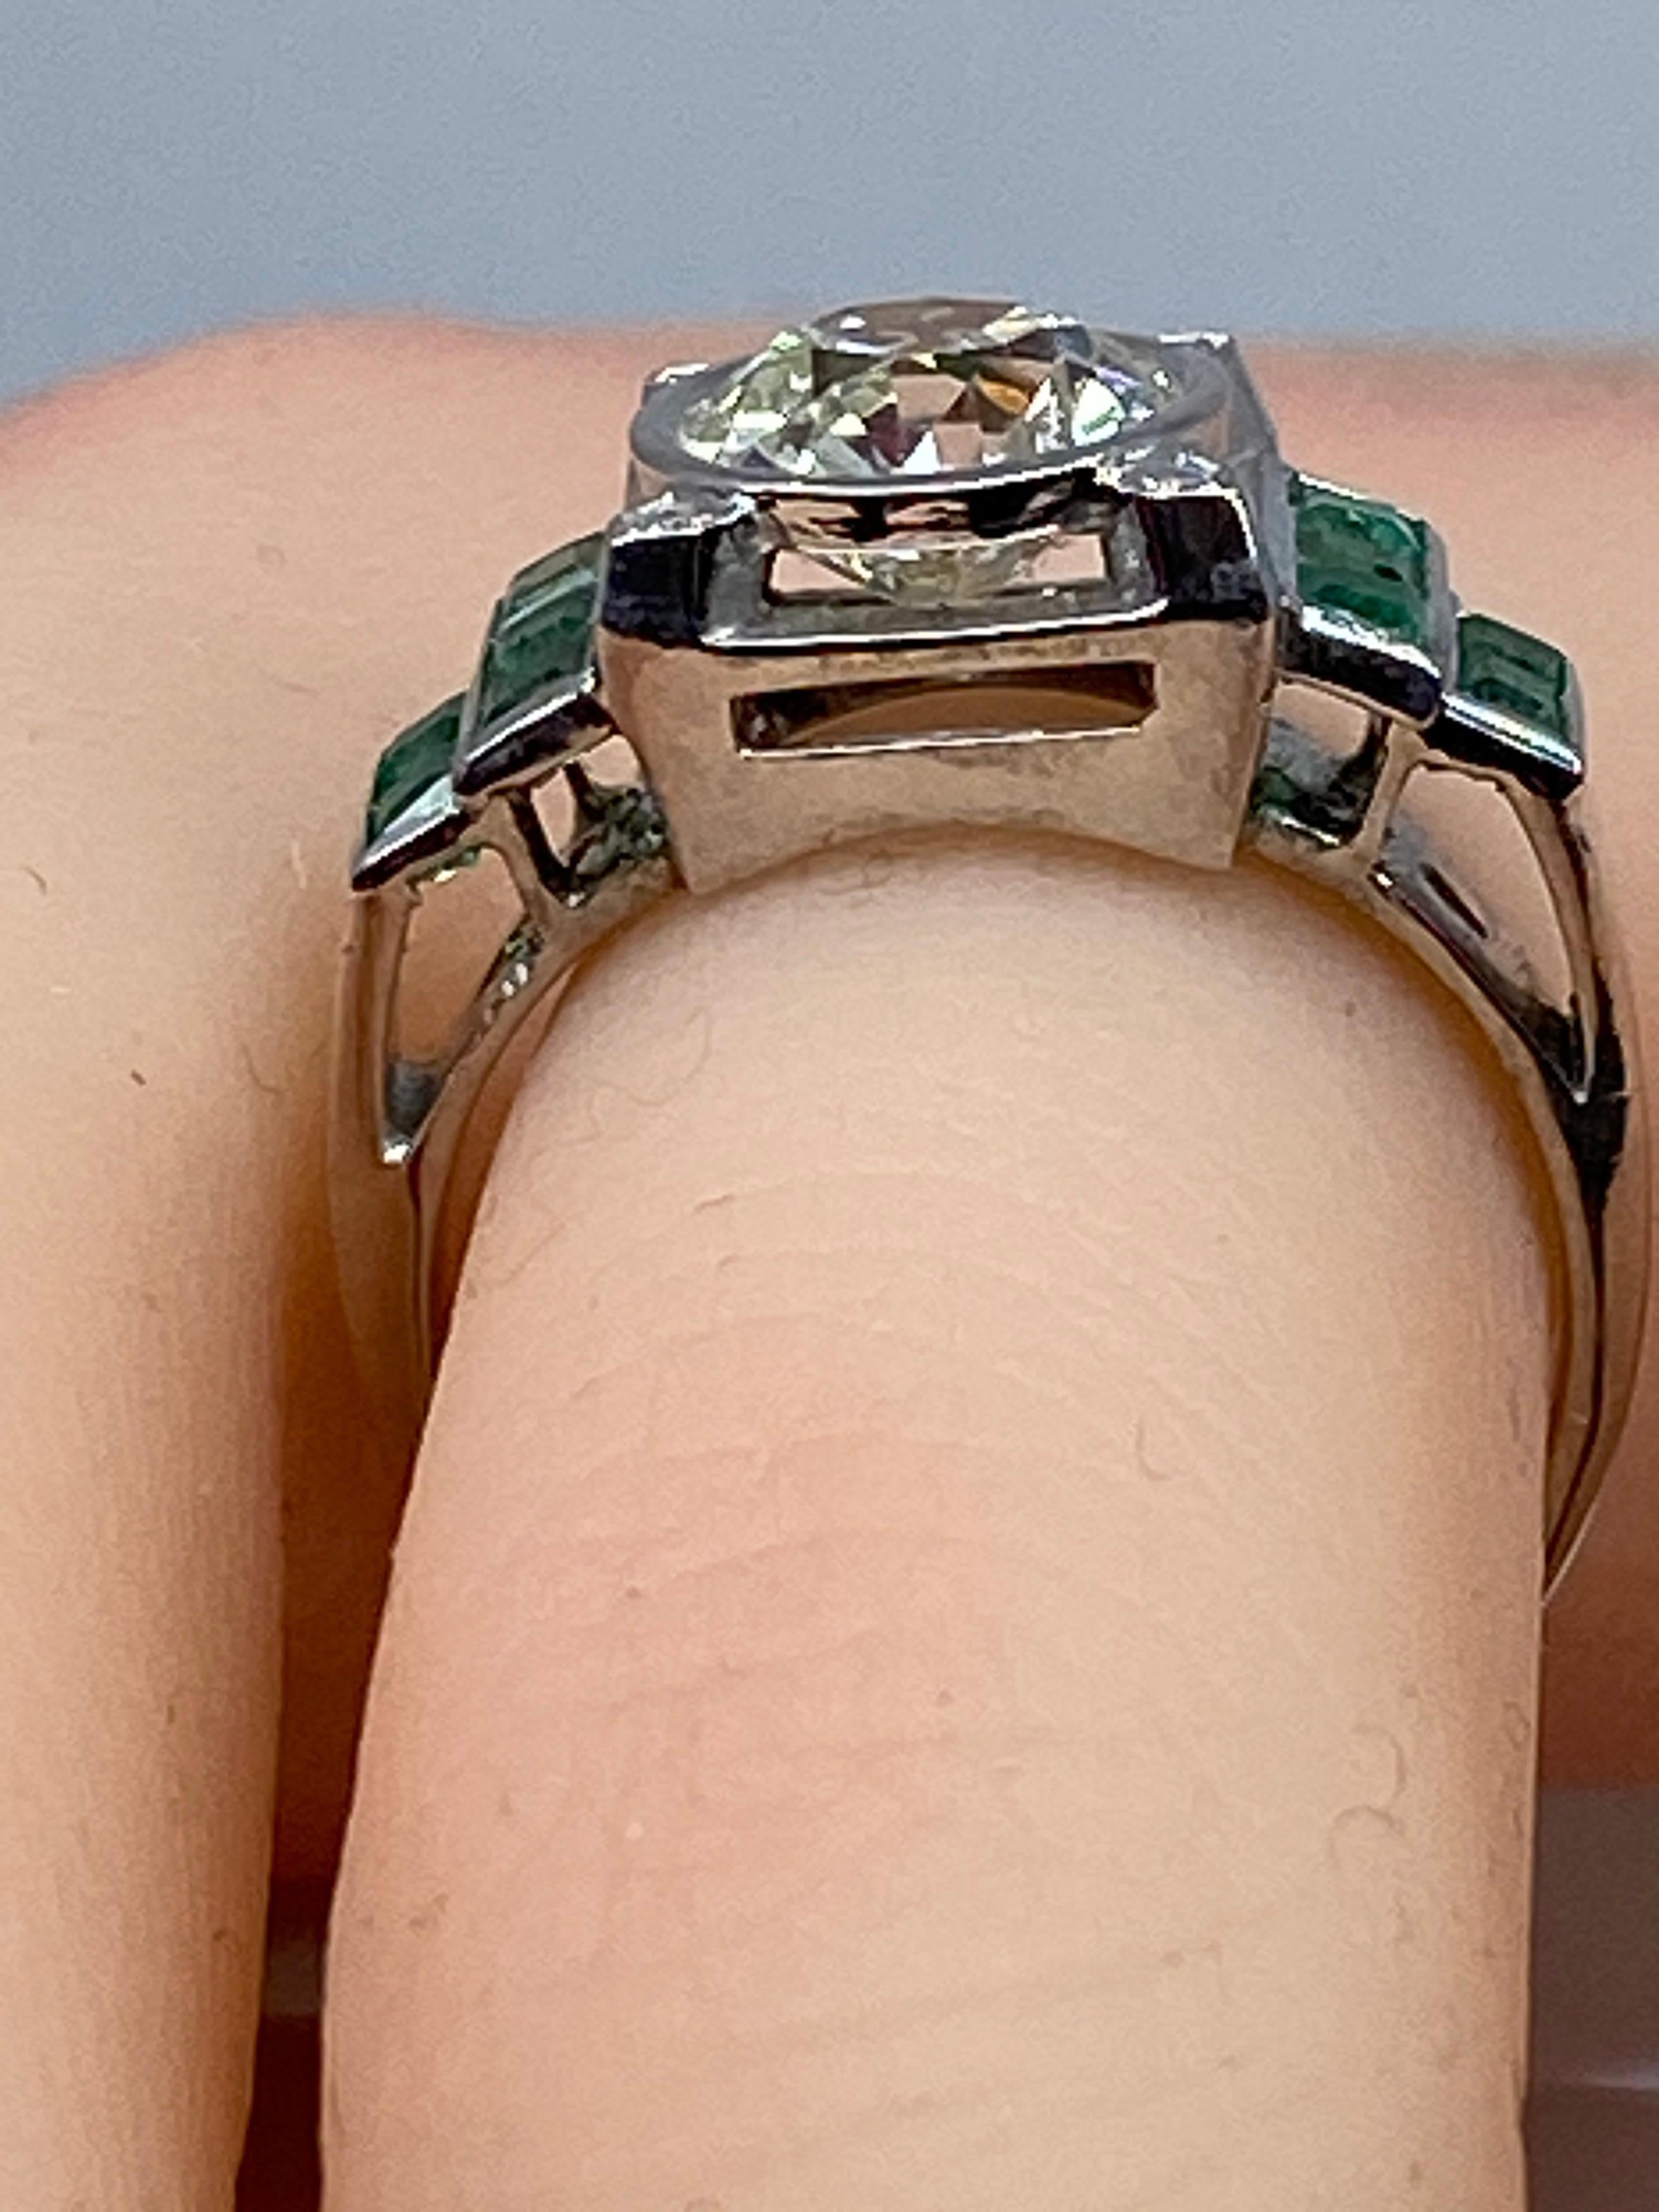 Platinium Engagement Ring Set with a 1.55 Carat Diamond Backed by Emeralds, 1900 For Sale 11